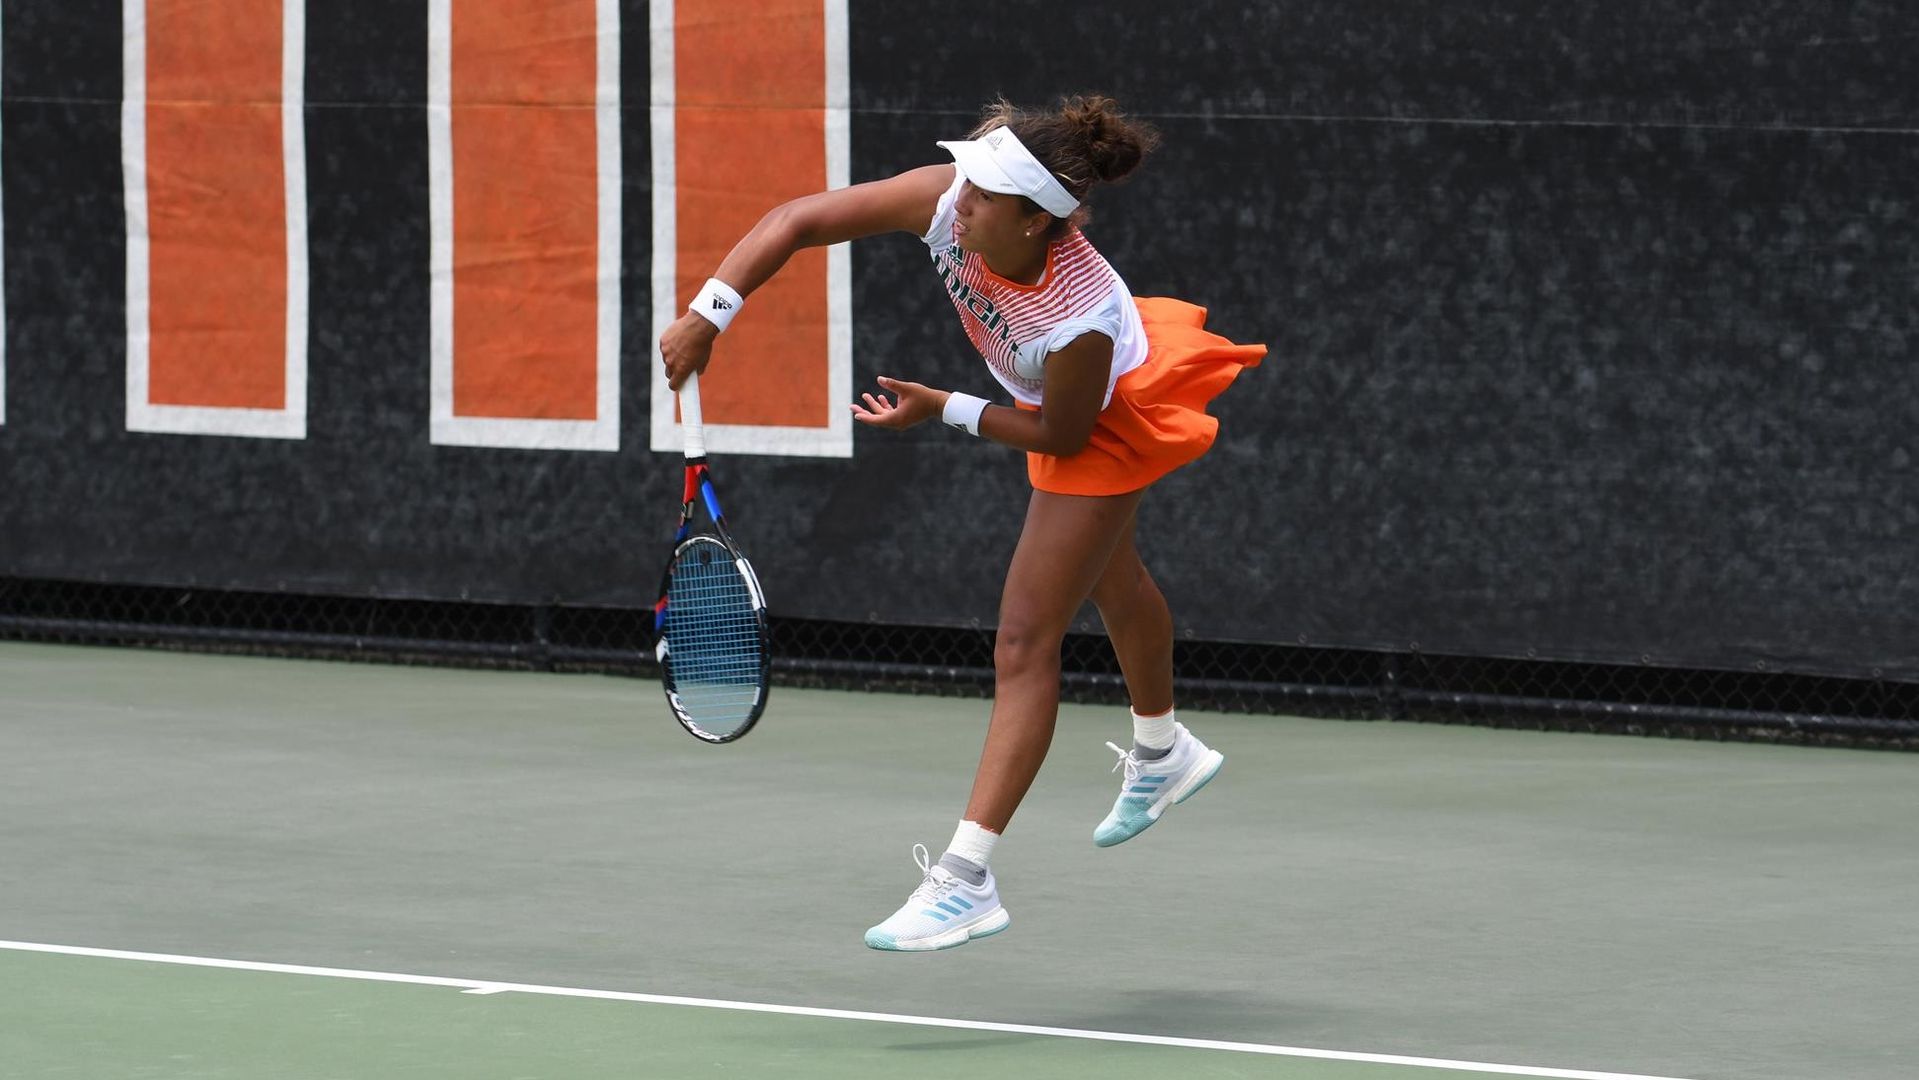 W. Tennis Meets No. 9 NC State in ACC Quarters